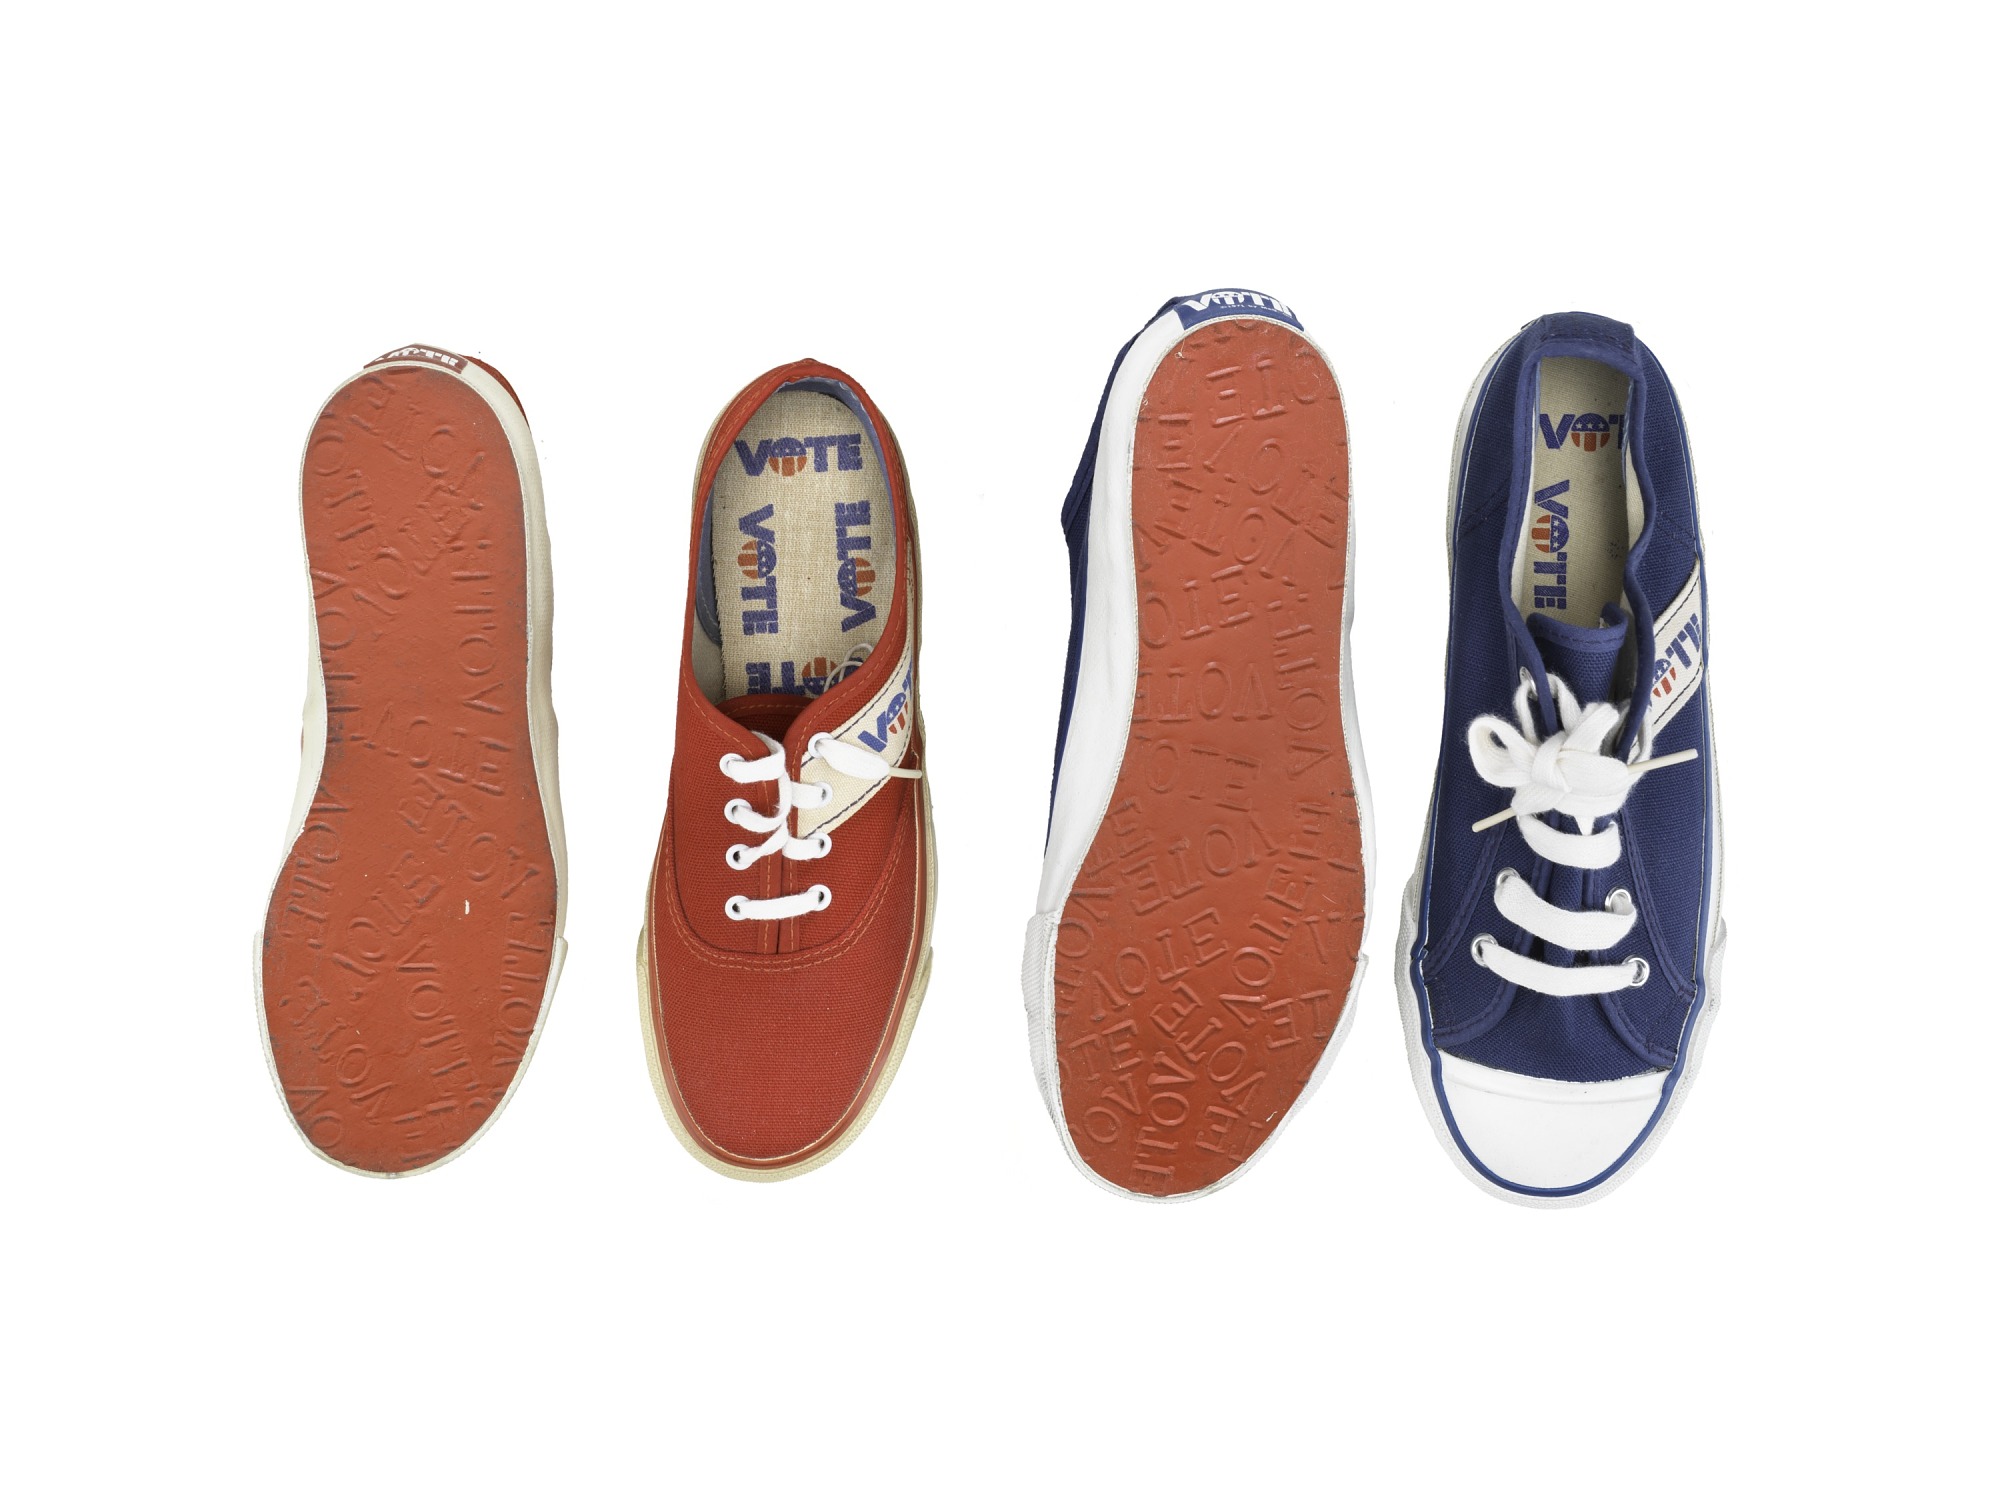 Two pairs of red and blue lace-up sneakers. Their insoles have text: vote.